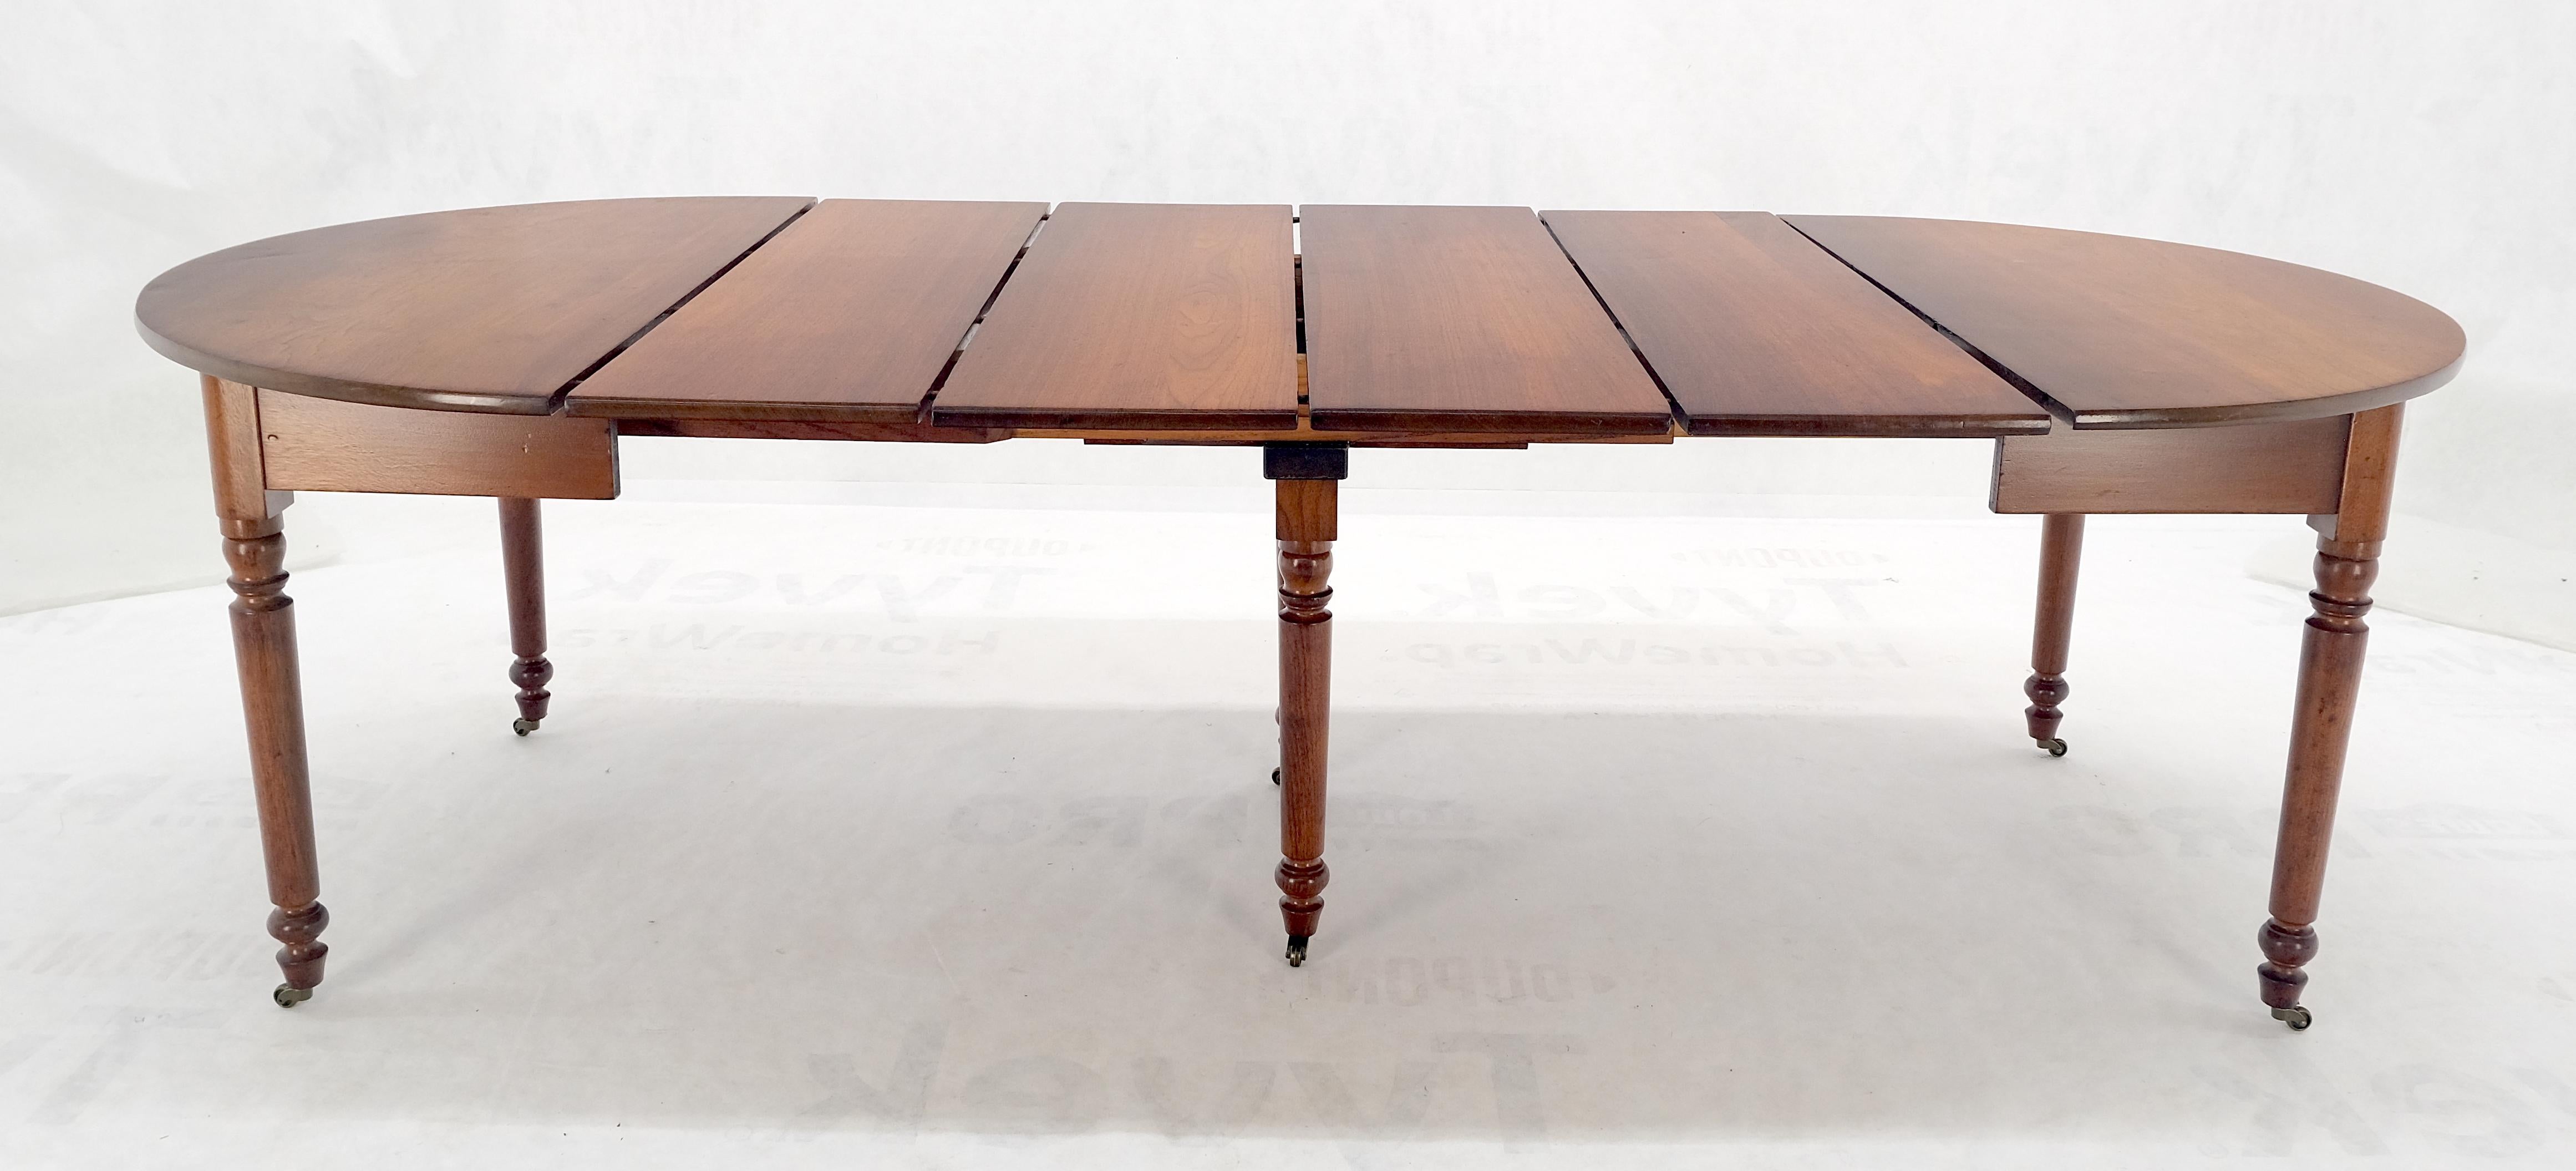 Antique Solid Light Amber Walnut Round Dining Table 4 Extension Boards MINT! For Sale 3